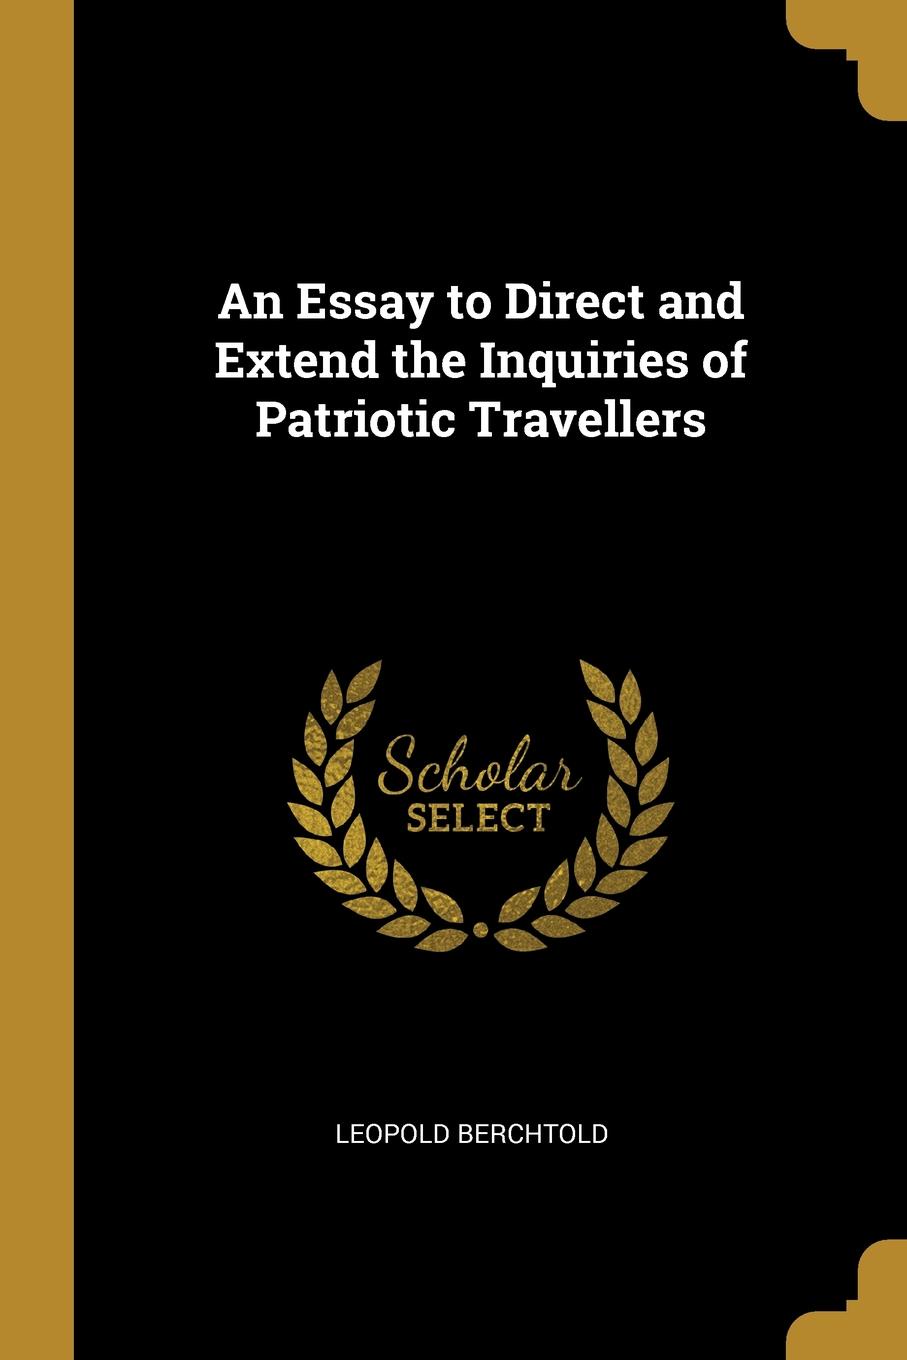 An Essay to Direct and Extend the Inquiries of Patriotic Travellers